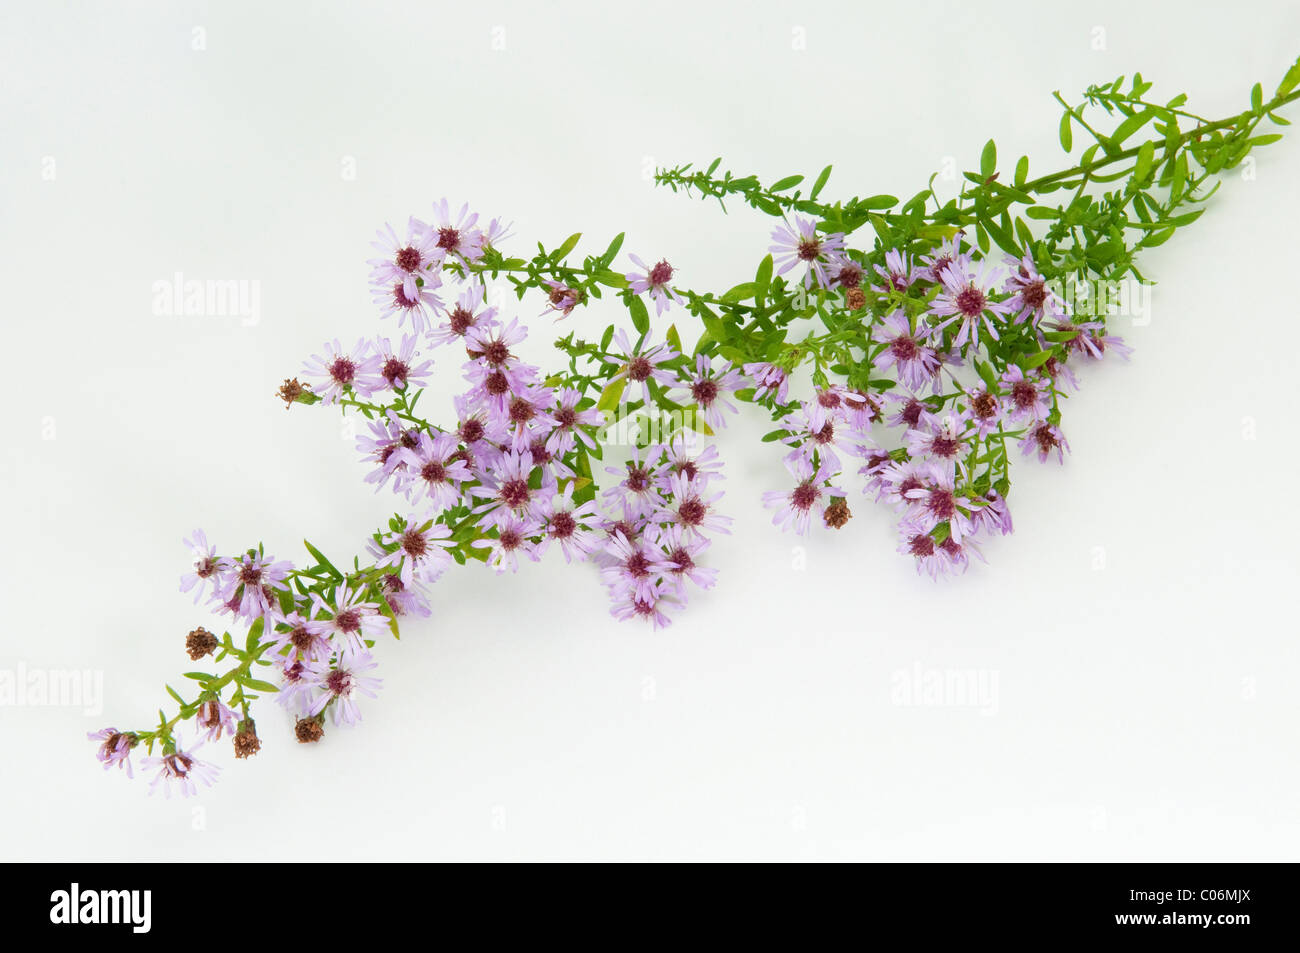 Small White Aster (Aster vimineus Lovely), flowering twig, studio picture against a white background. Stock Photo